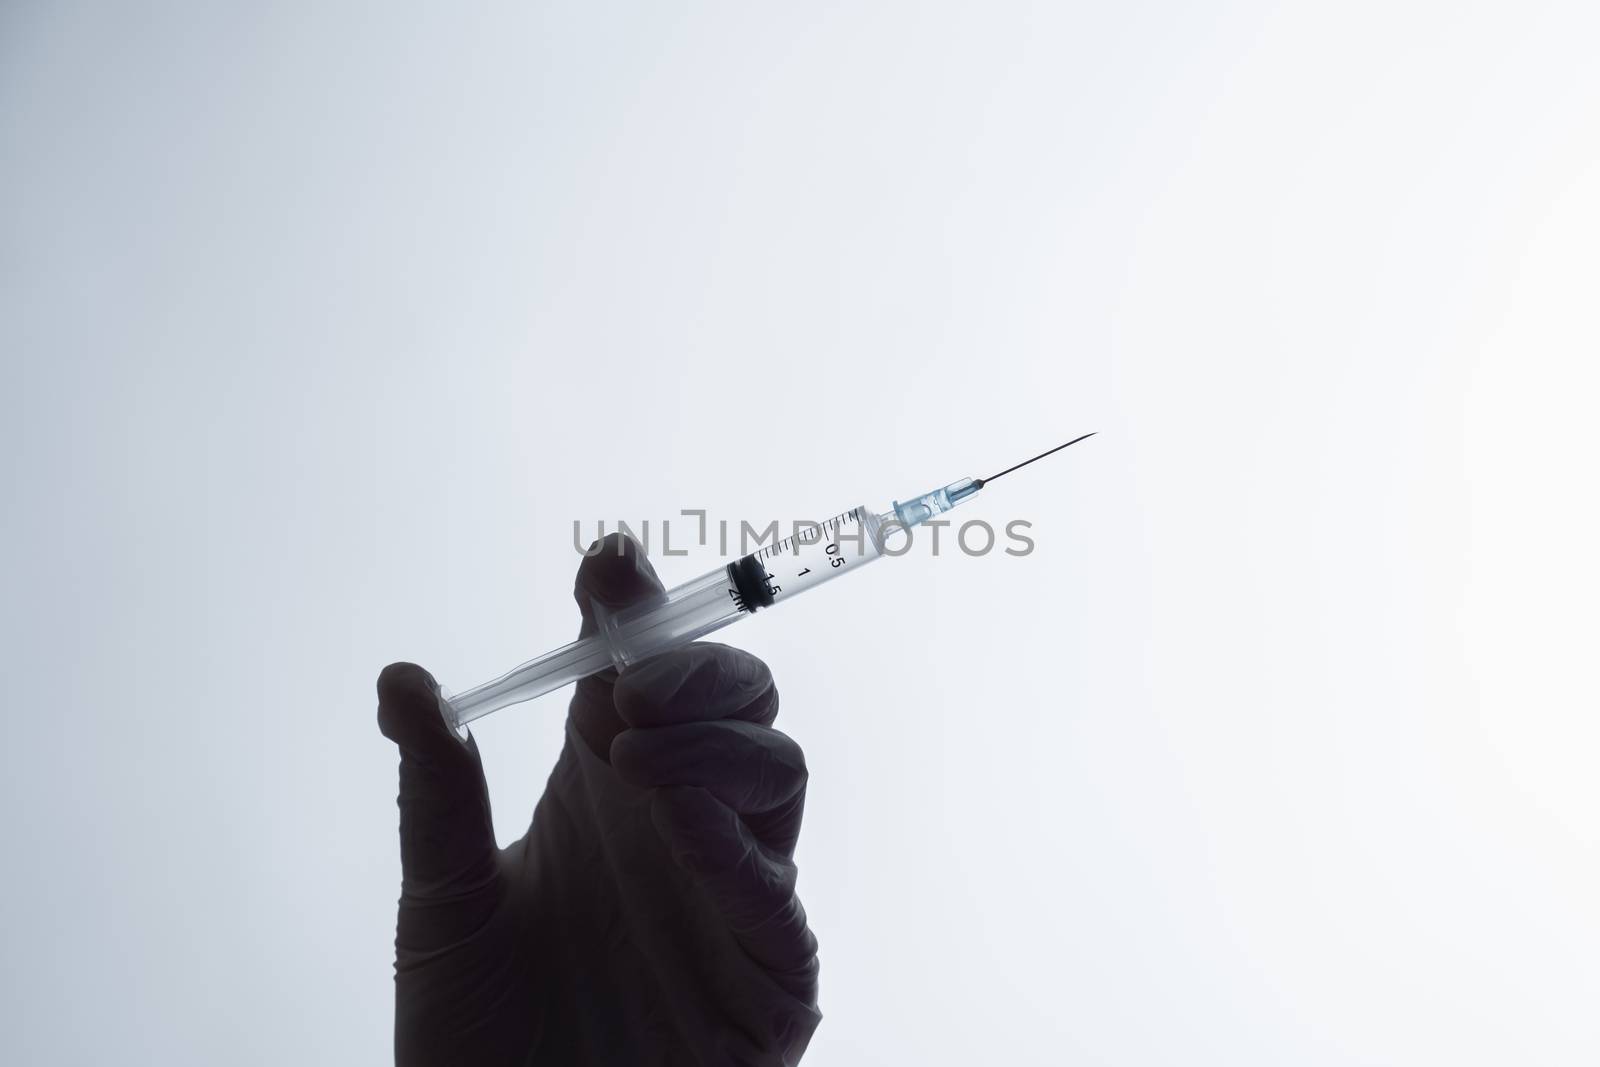 Injection ready for application, dark silhouette on white background. Hand in glove holding a syringe with intravenous injection, concept of vaccination or illegal medicine